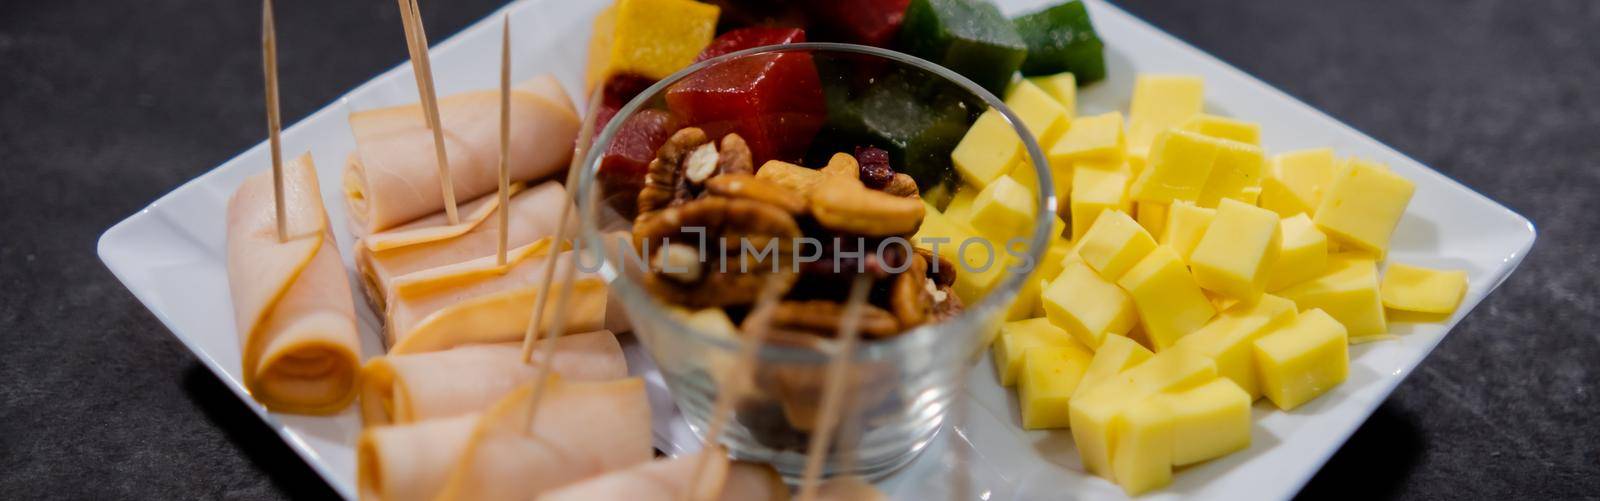 Wide view of turkey ham rolls, diced fruit paste, cheddar cheese cubes, and glass of walnuts on square white plate. Turkey meat, colorful Mexican candy, and nuts above black surface. Healthy snacks